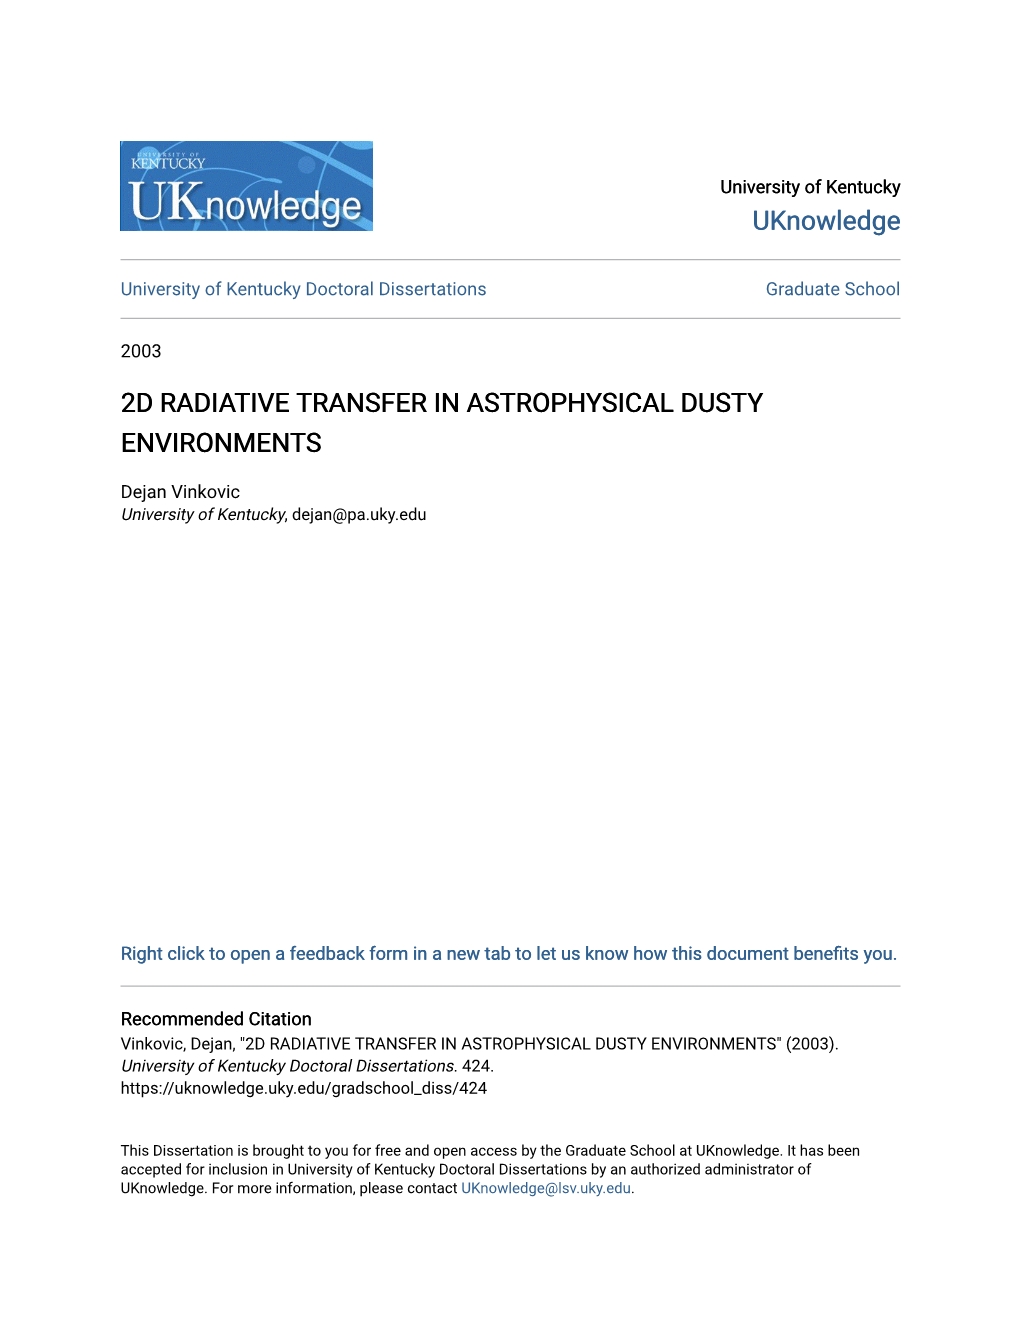 2D Radiative Transfer in Astrophysical Dusty Environments